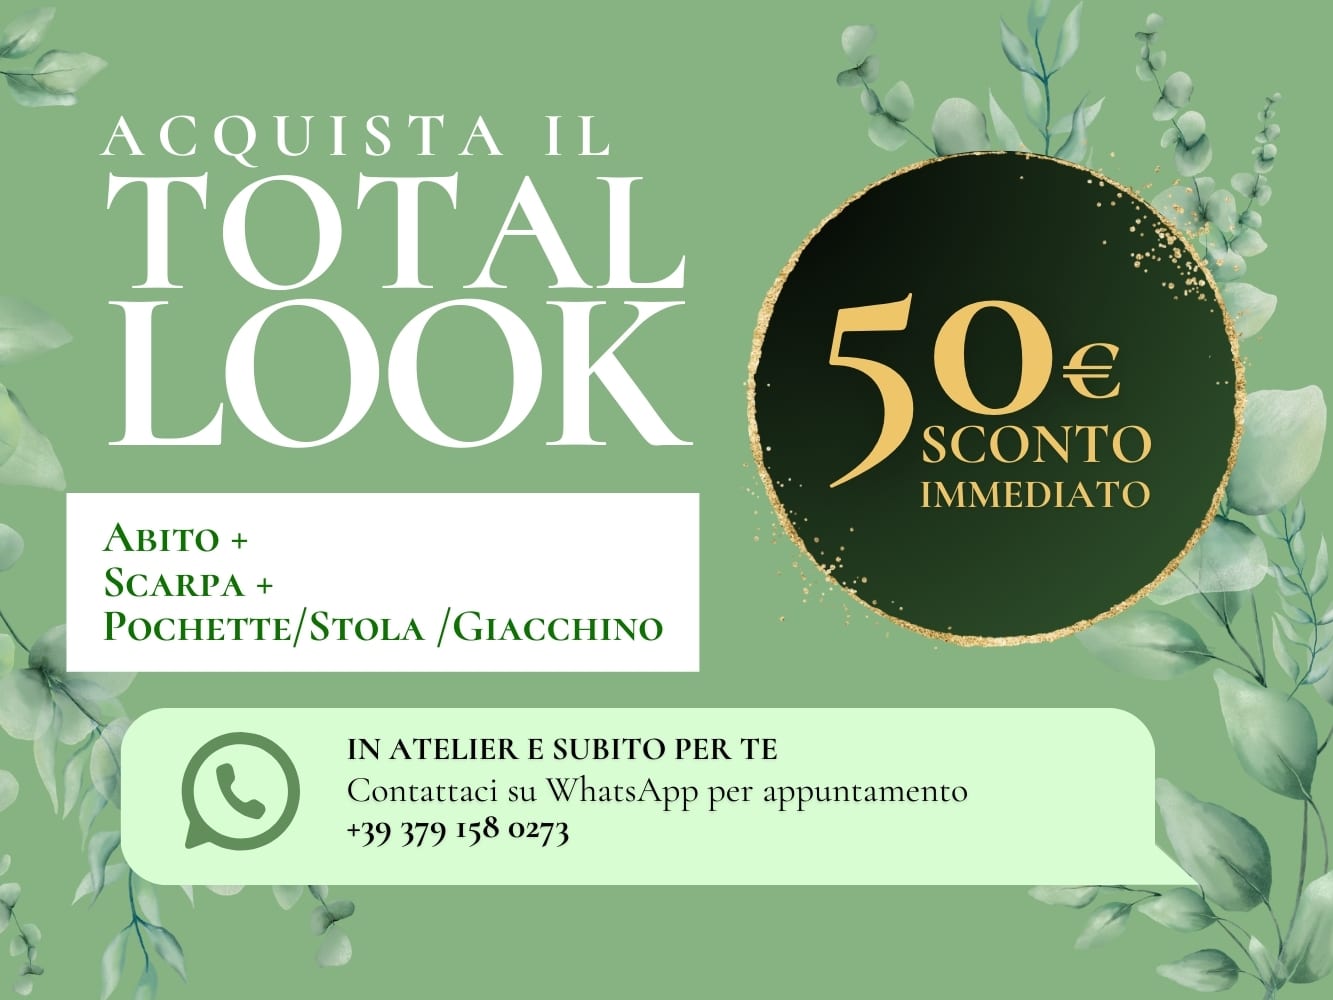 ACOUISTA IL TOTAL LOOK